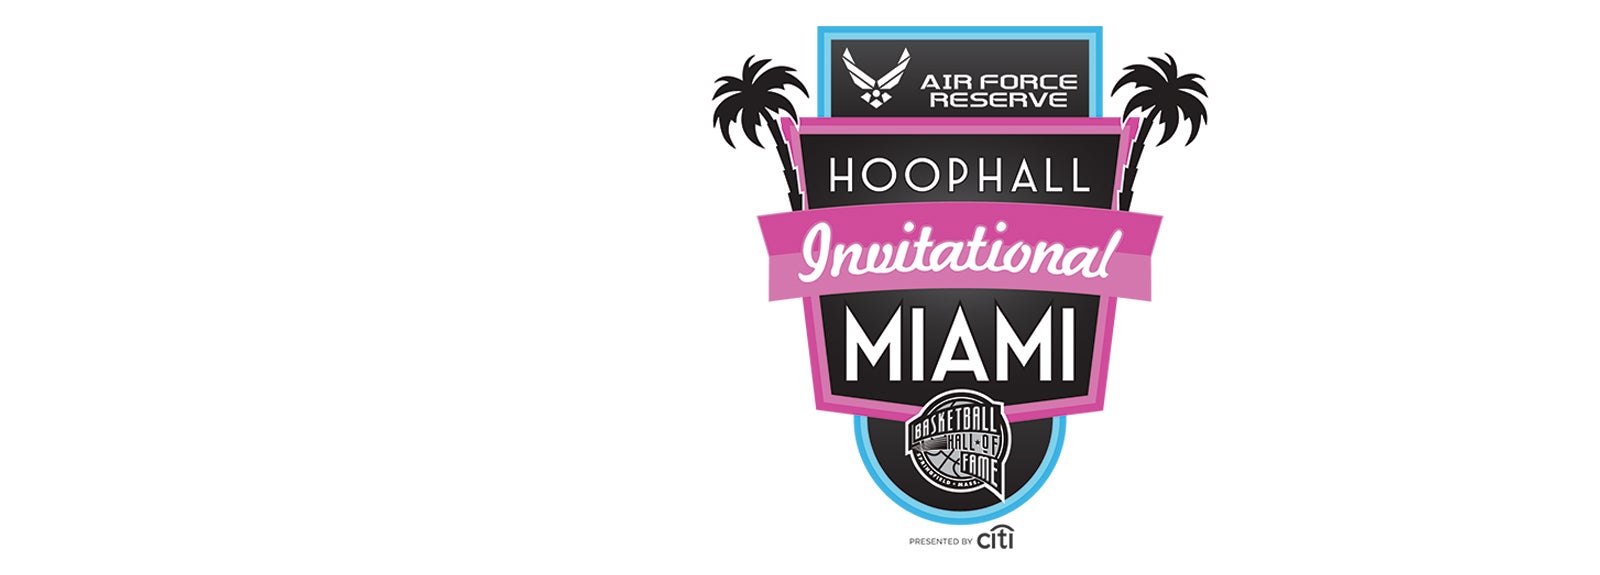 Air Force Reserve Hoophall Miami Invitational